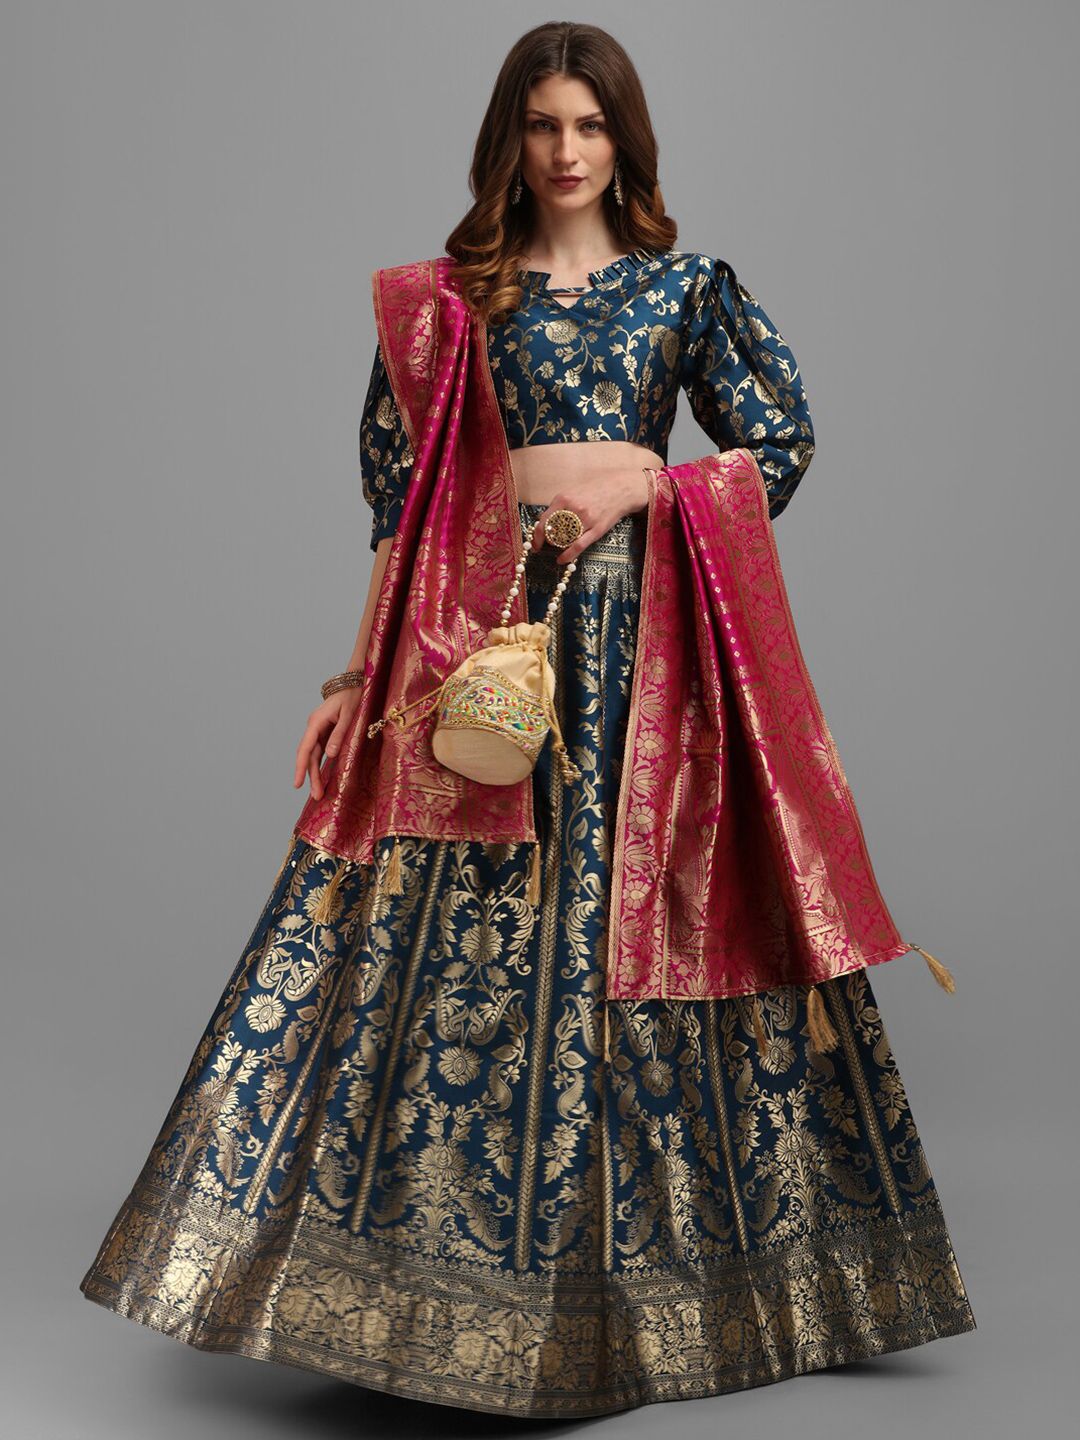 PURVAJA Teal Blue & Gold-Toned Semi-Stitched Lehenga & Unstitched Blouse With Dupatta Price in India